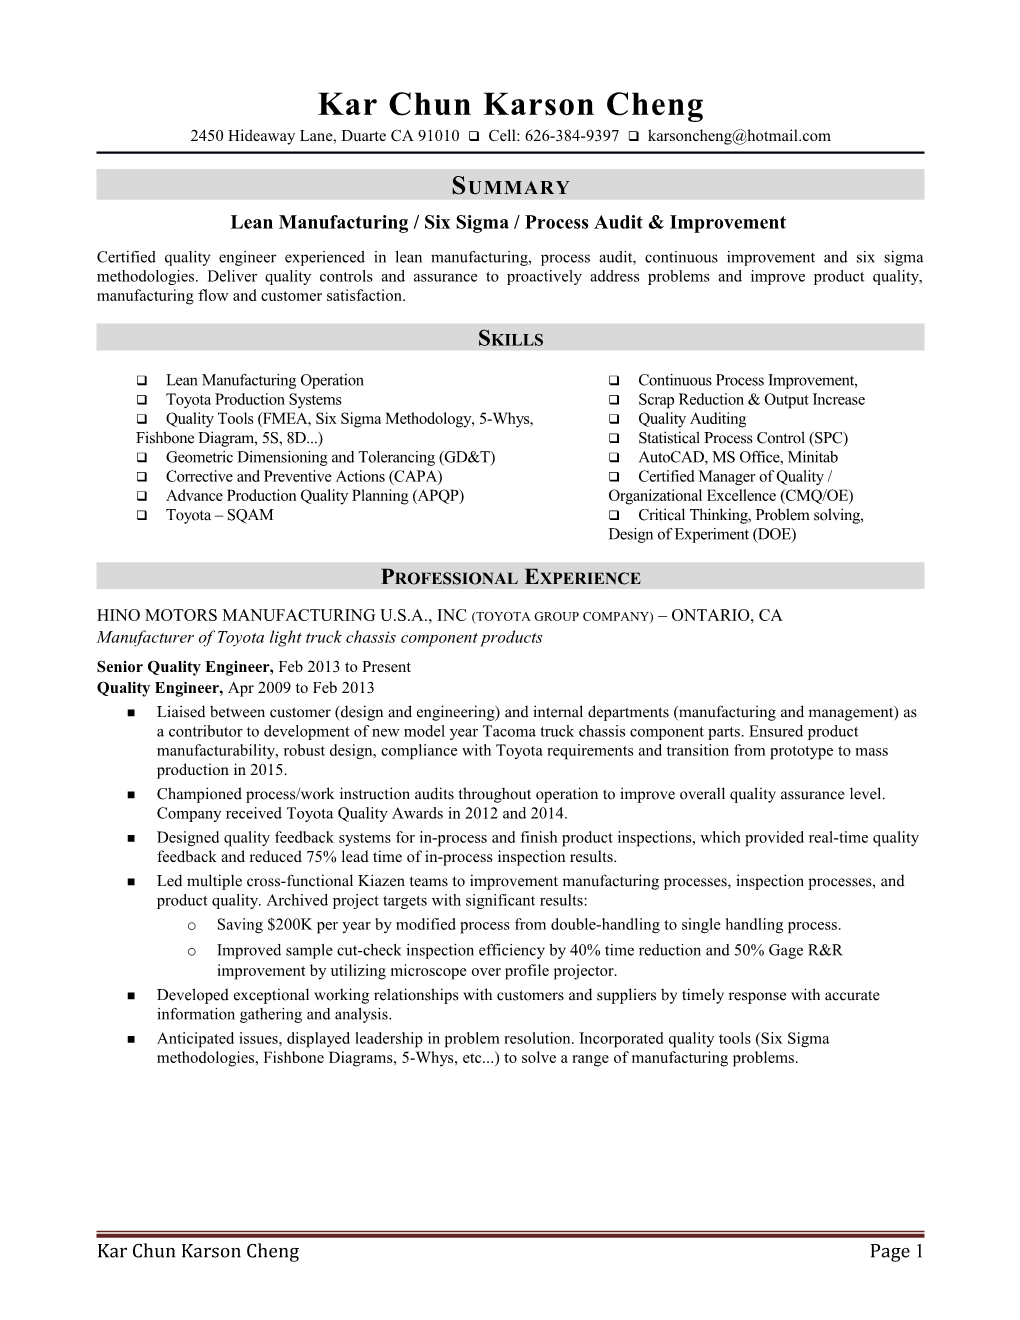 Midlevel Manufacturing Quality Engineer